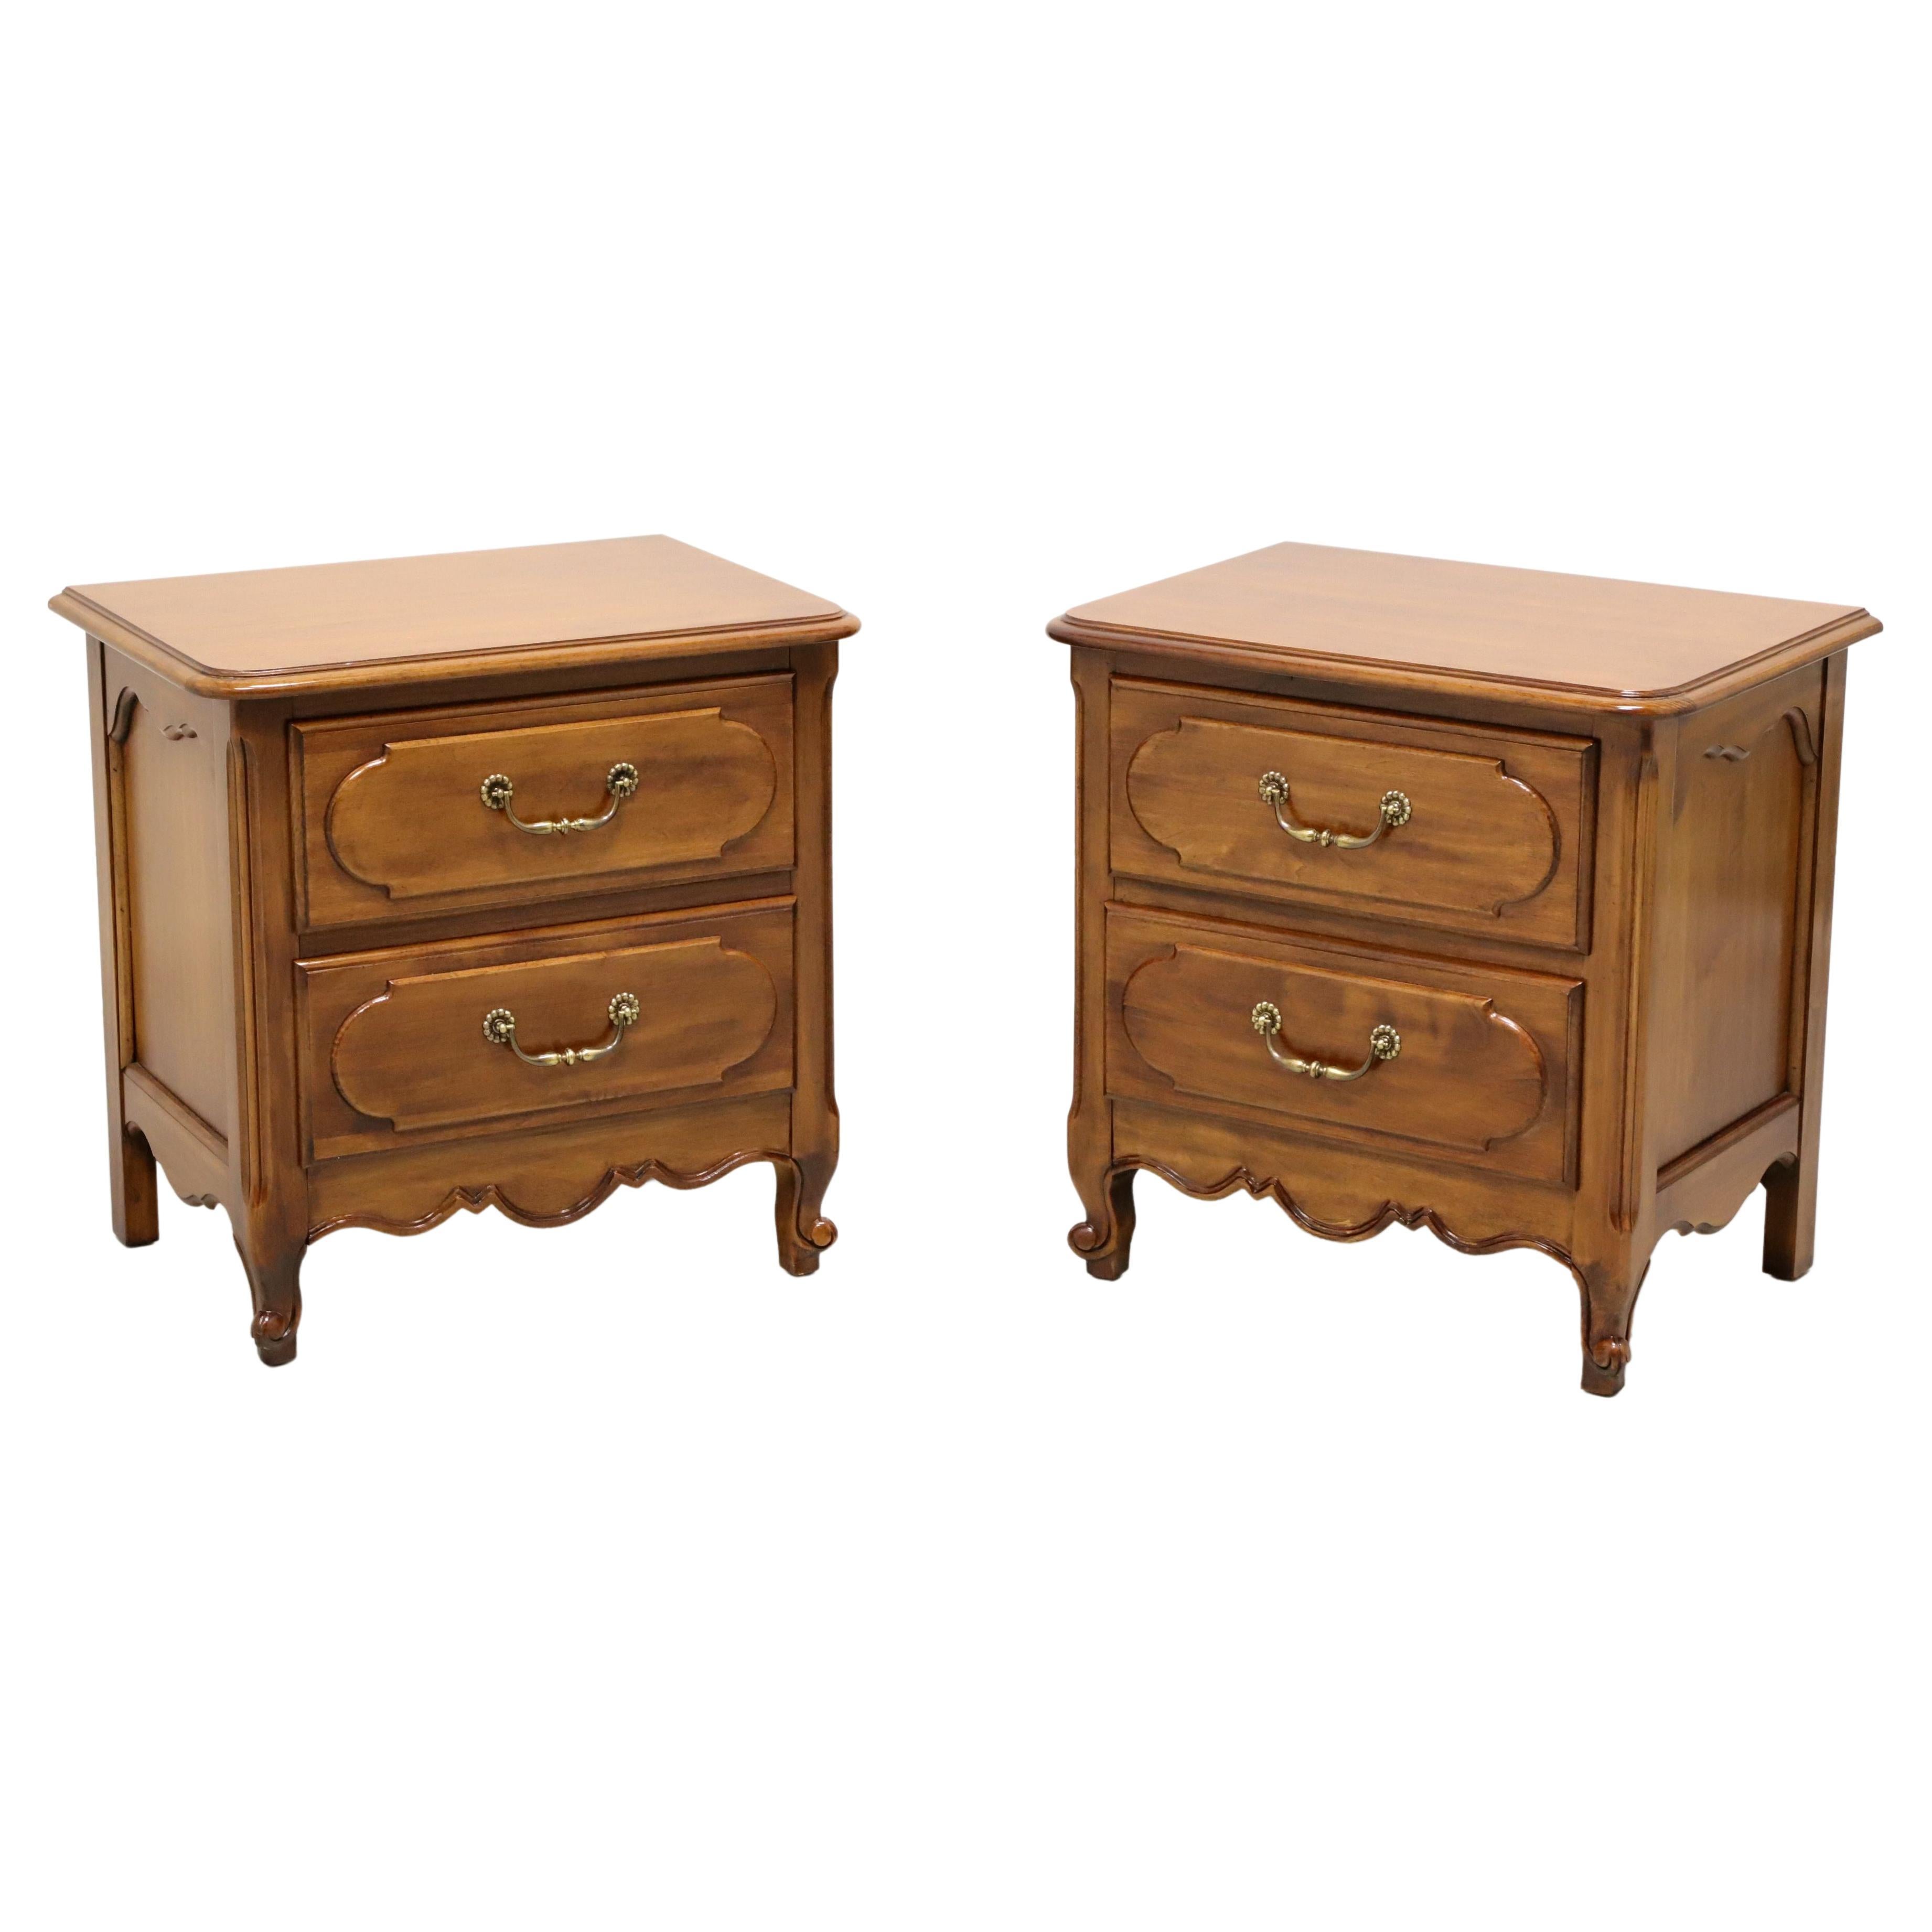 HENRY LINK Margaux Collection Cherry French Country Louis XV Nightstands - Pair